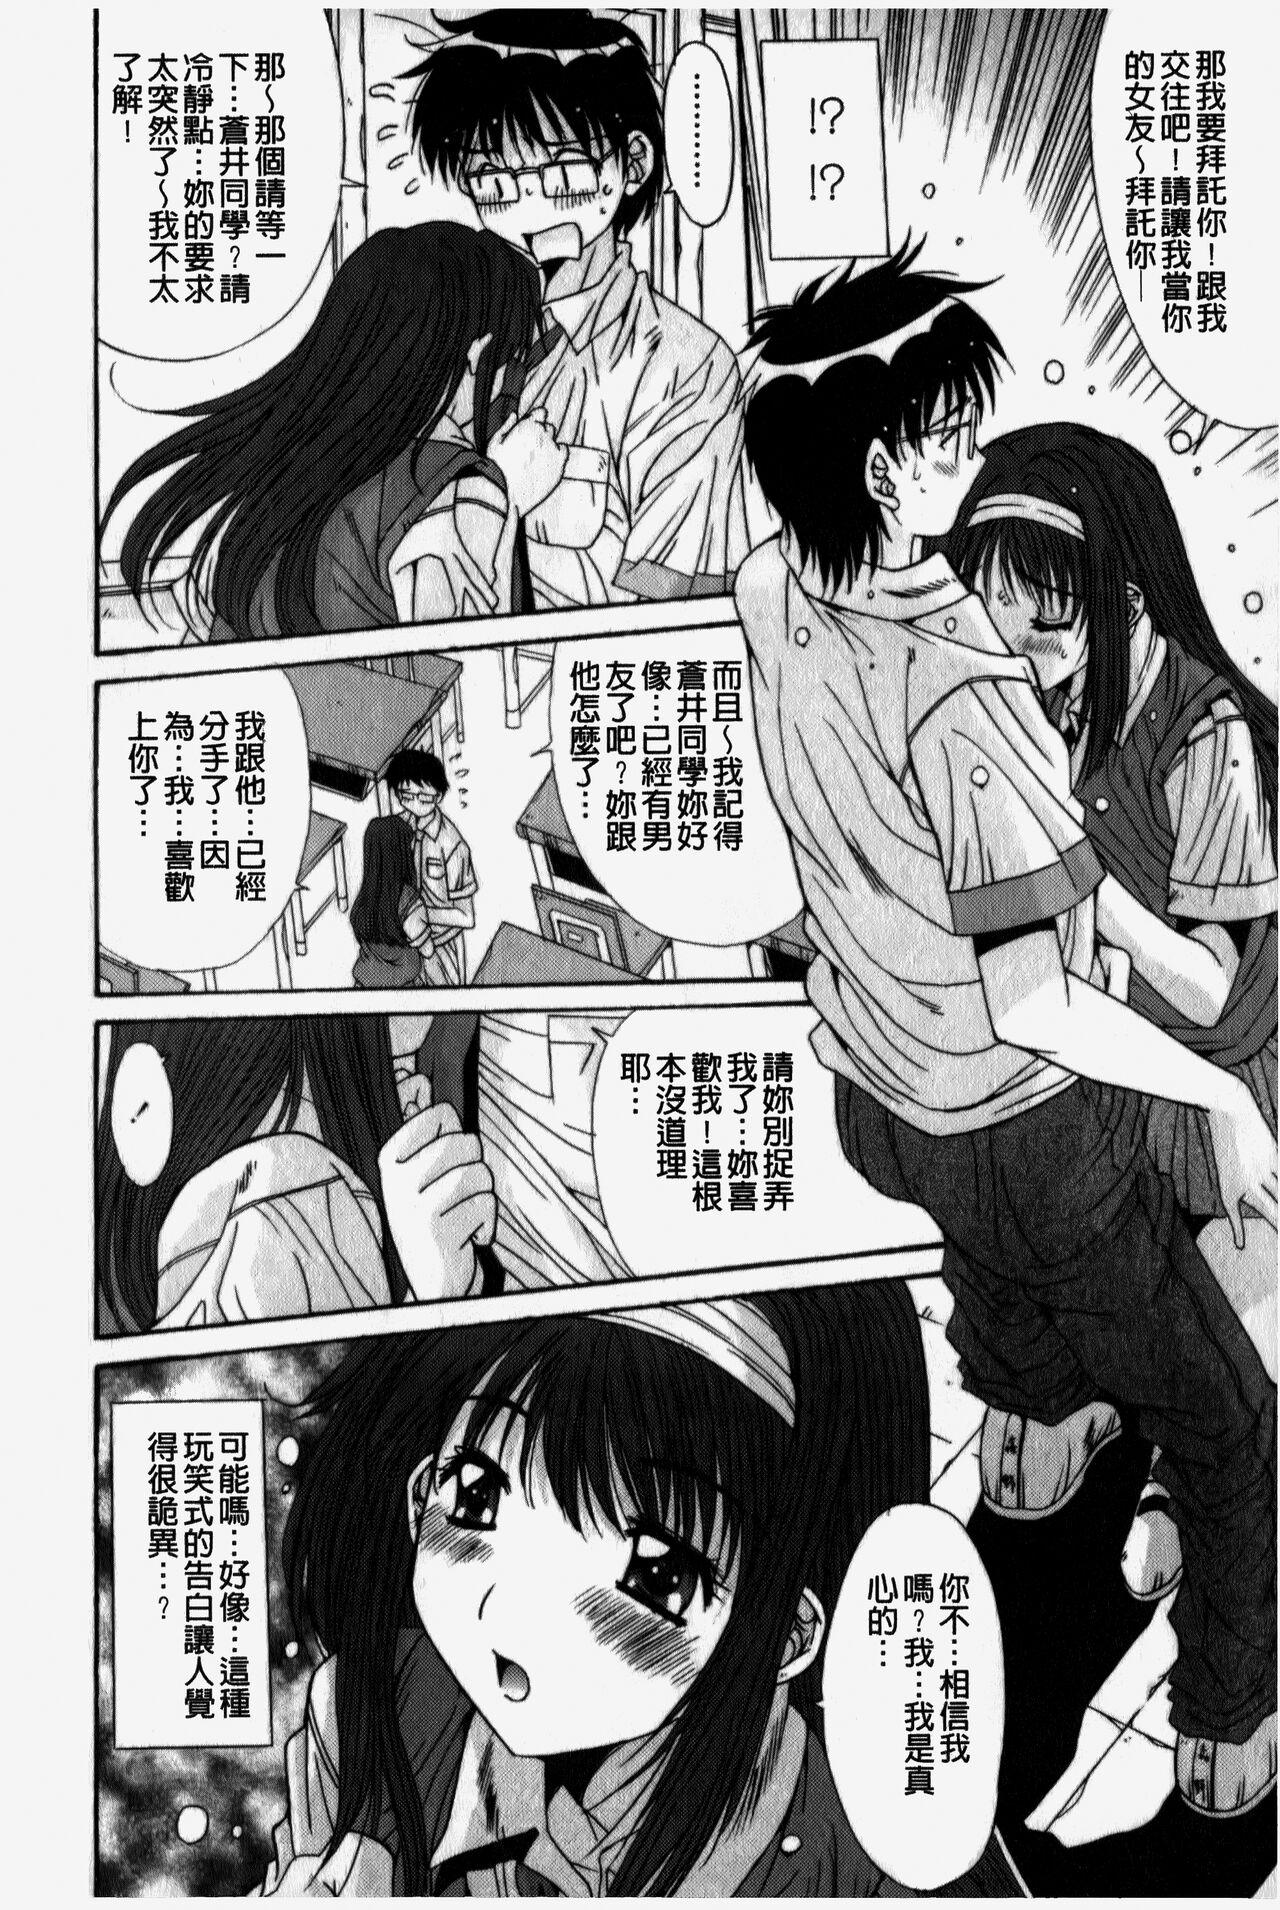 Licking Pussy Kare to Kanojo no Jijou - Boy Meets Girl | 男友與女友之間的情事 Roughsex - Page 11